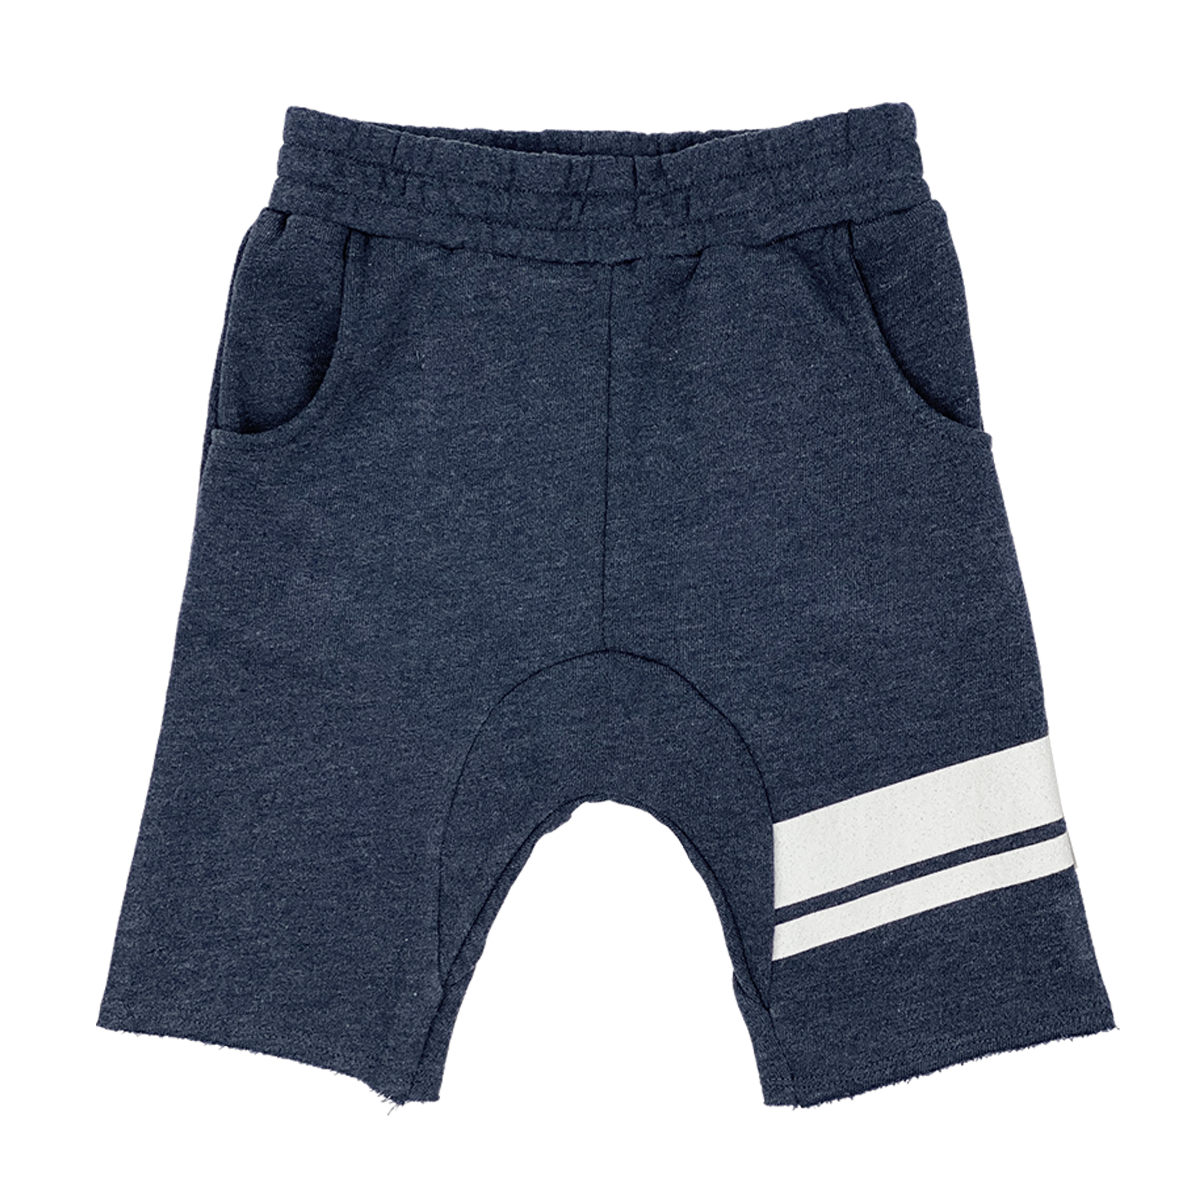 Tiny Whales - Off Duty Cozy Time Shorts - Heather/Navy